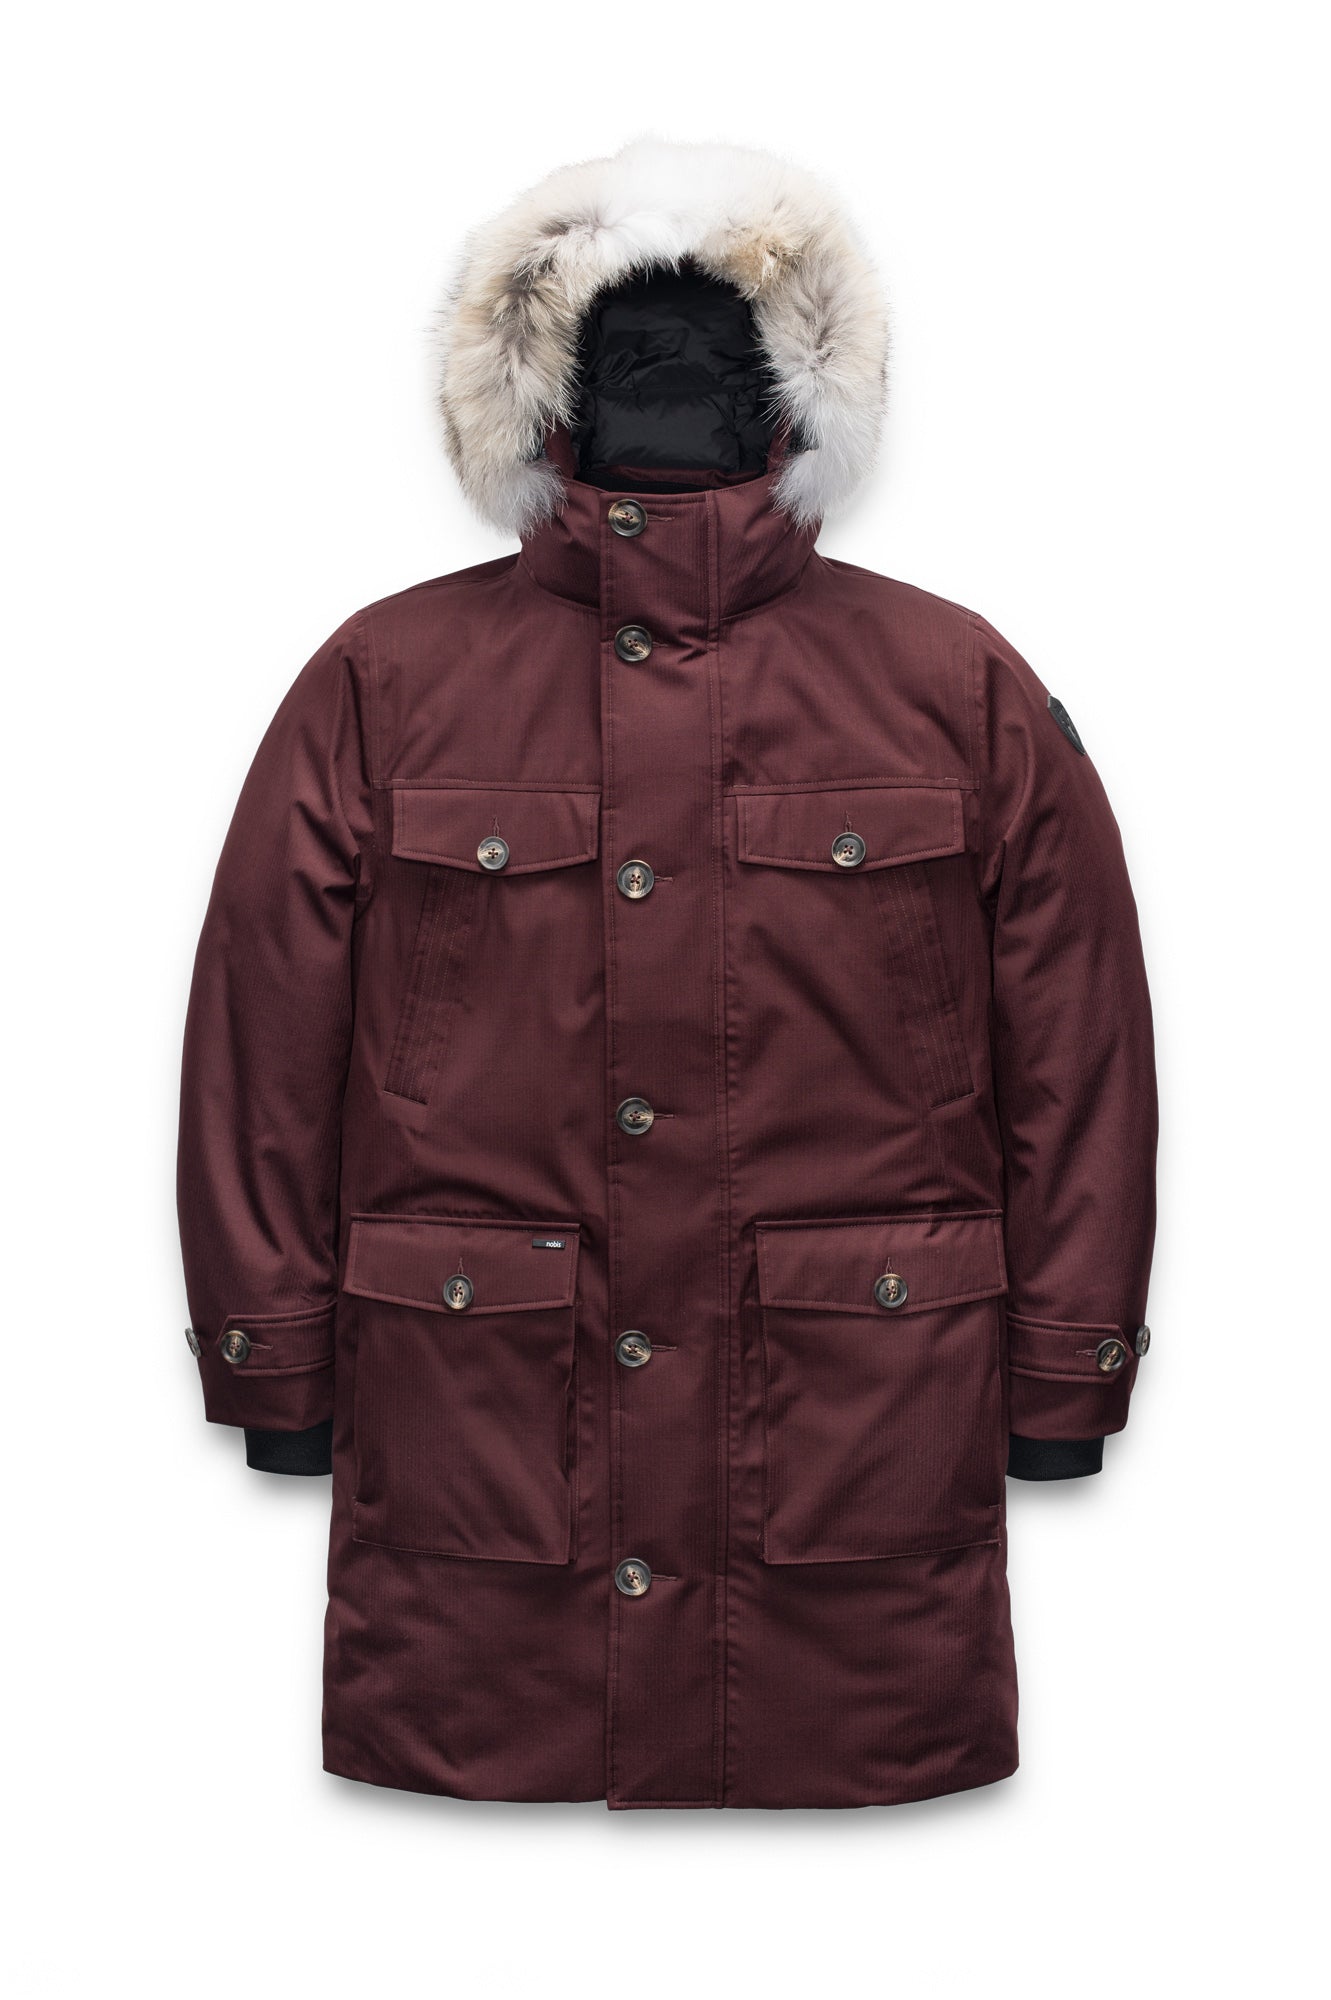 Citizen Men's Tailored Parka in knee length, Canadian duck down insulation, non-removable hood, and two-way zipper, in Merlot